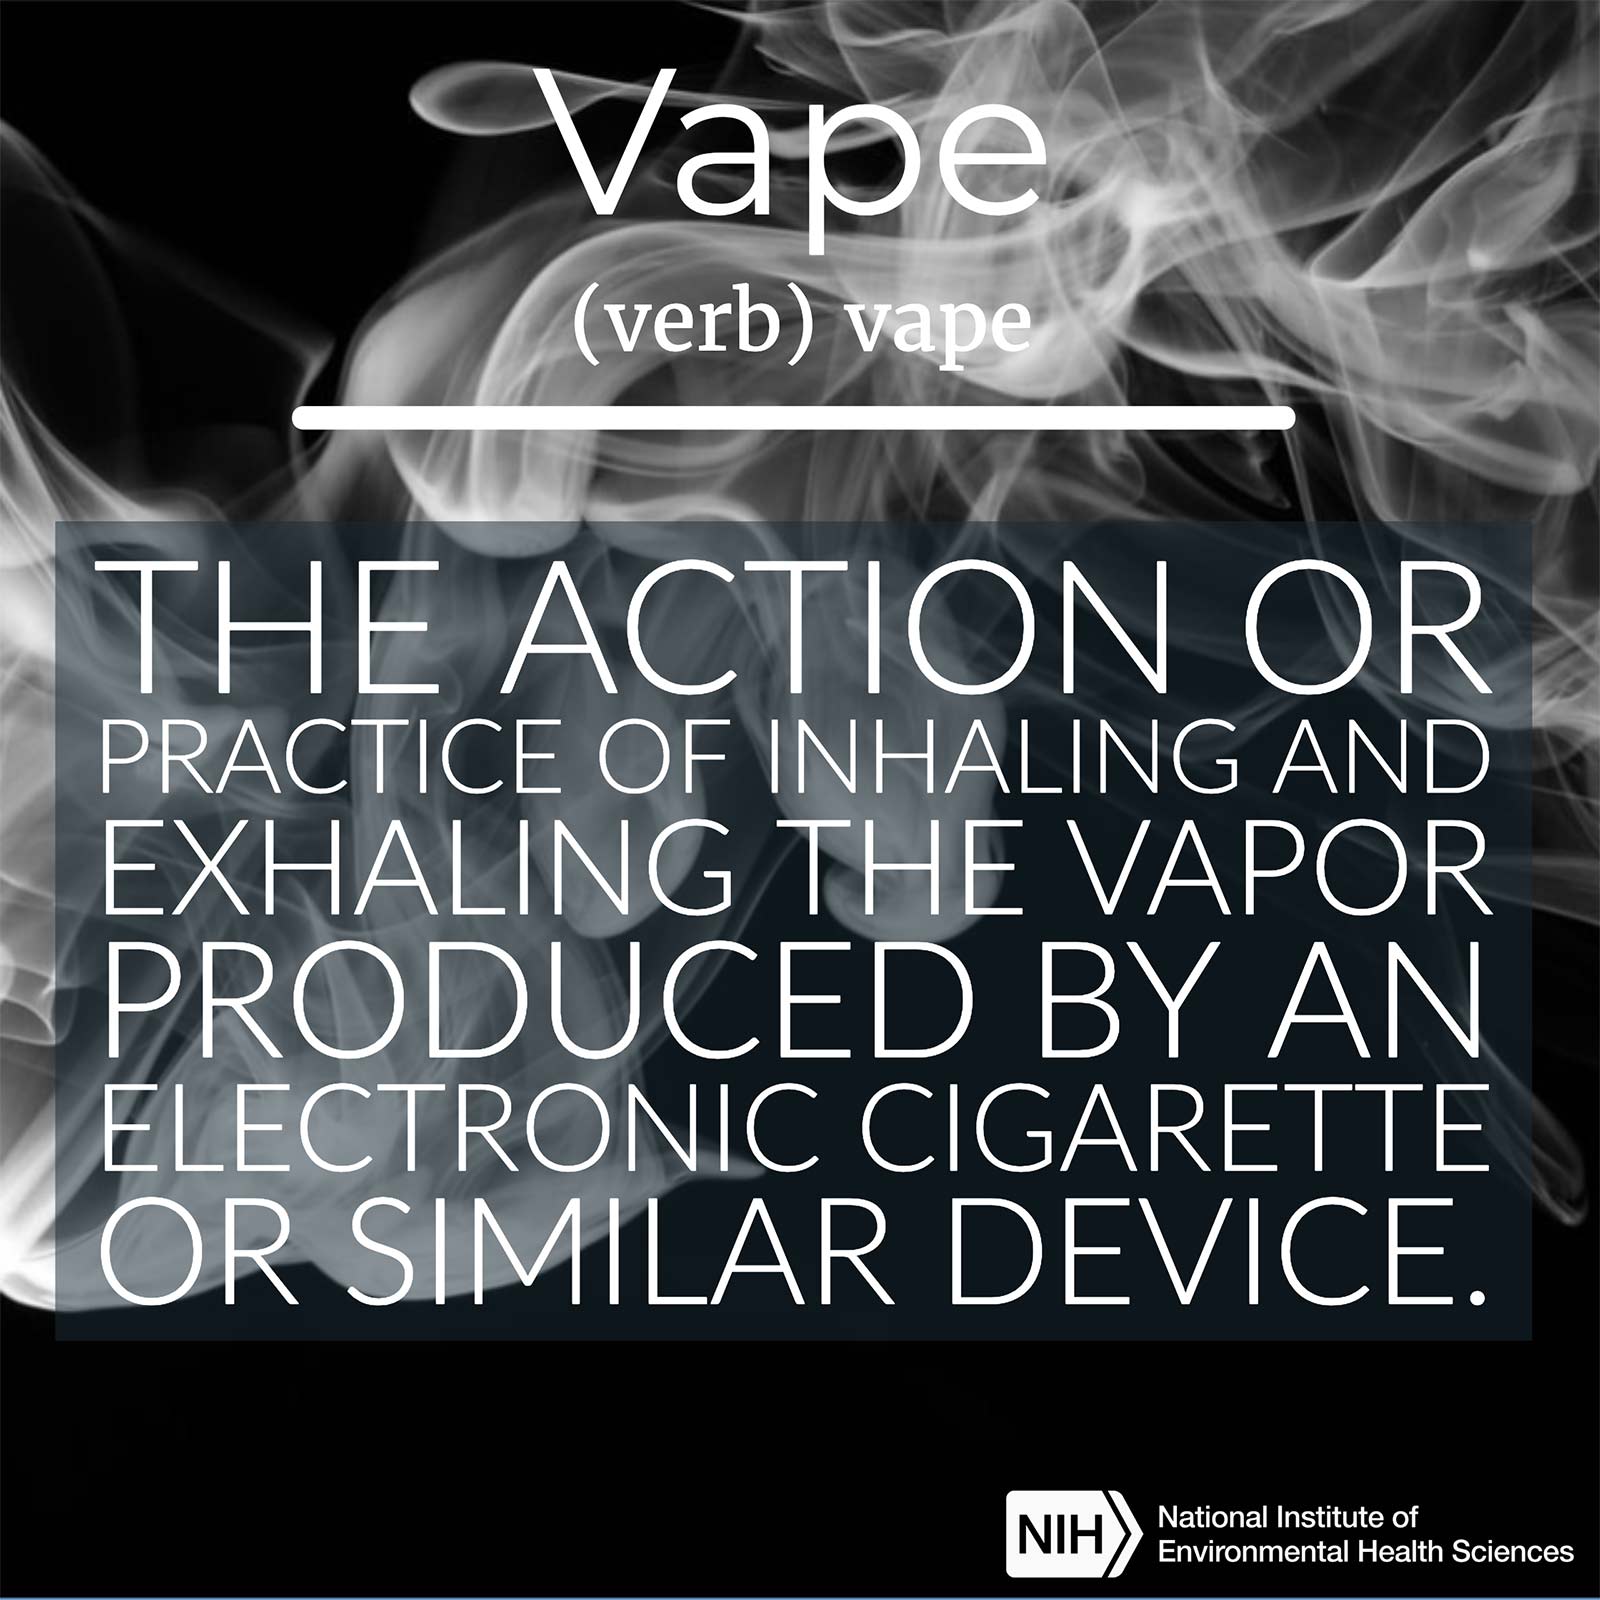 Vape (verb) defined as 'The action or practice of inhaling the vapor produced by an electronic cigarette or similar device'